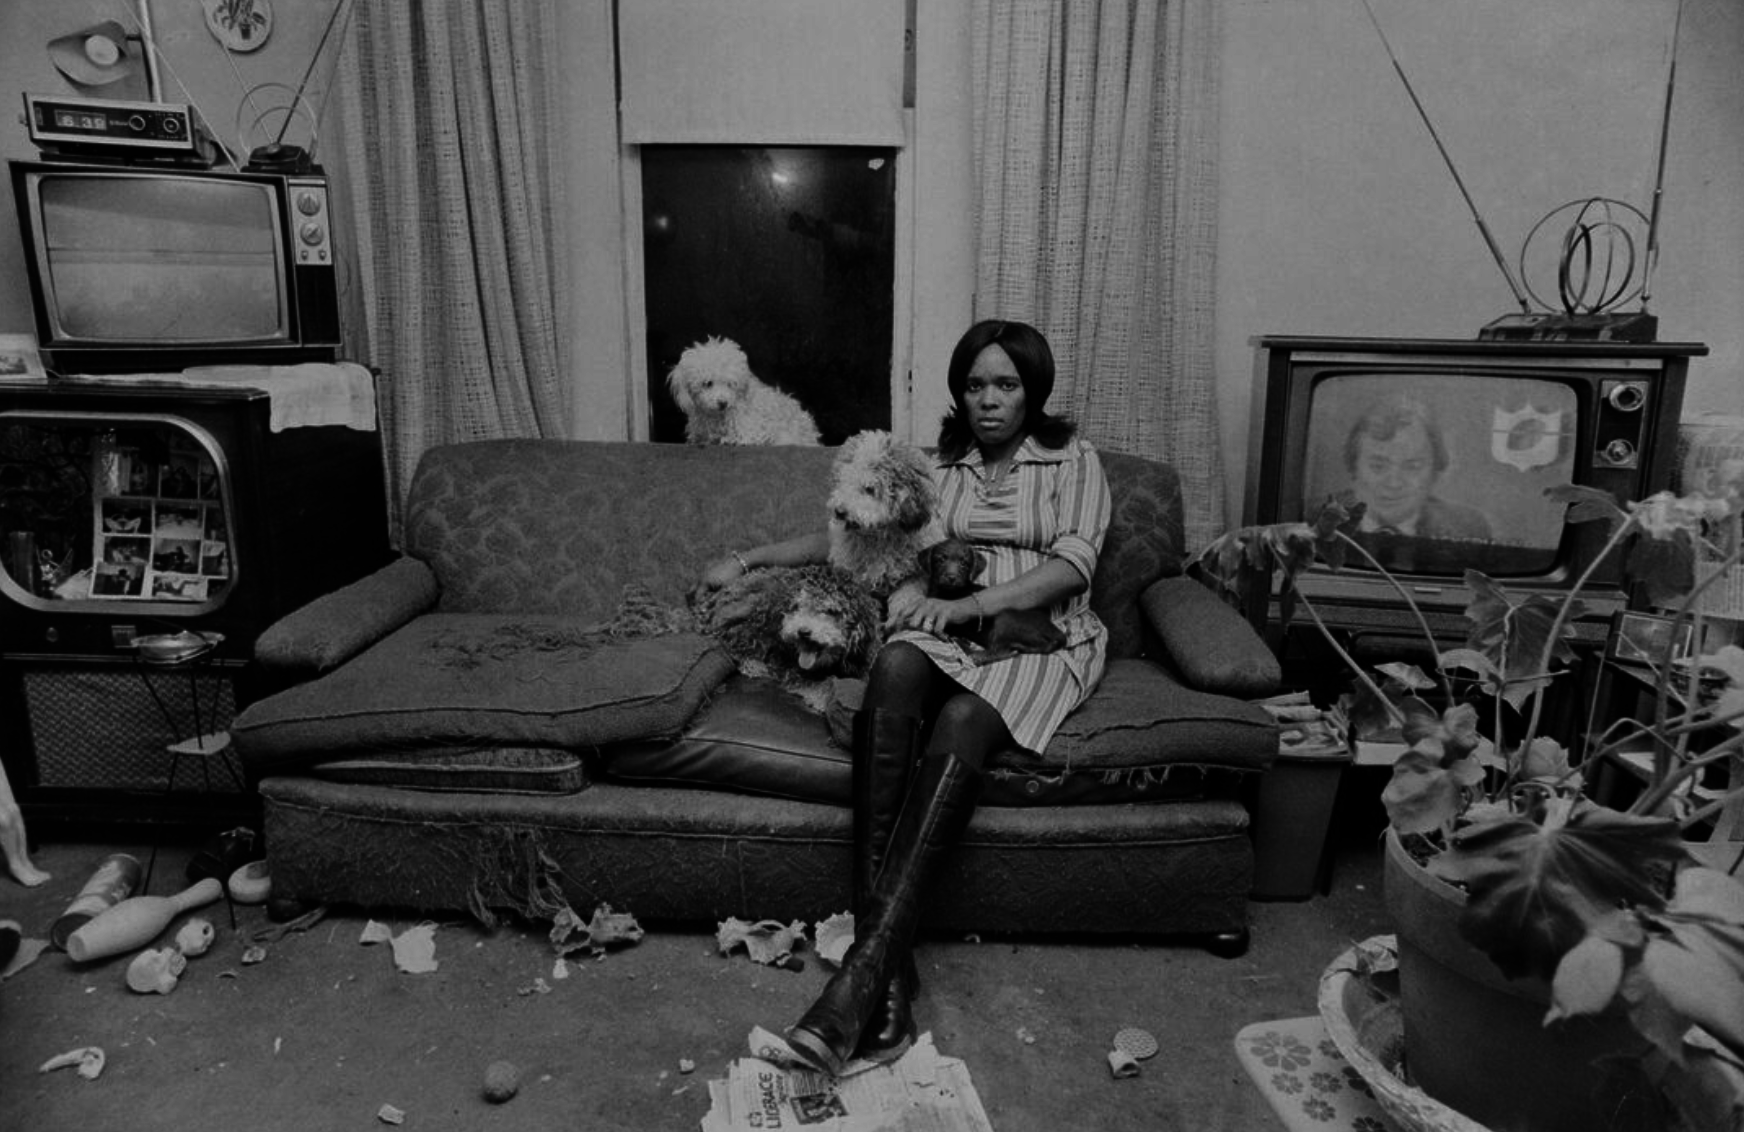 Three dogs sit next to a woman on a sofa in a deshuffled room